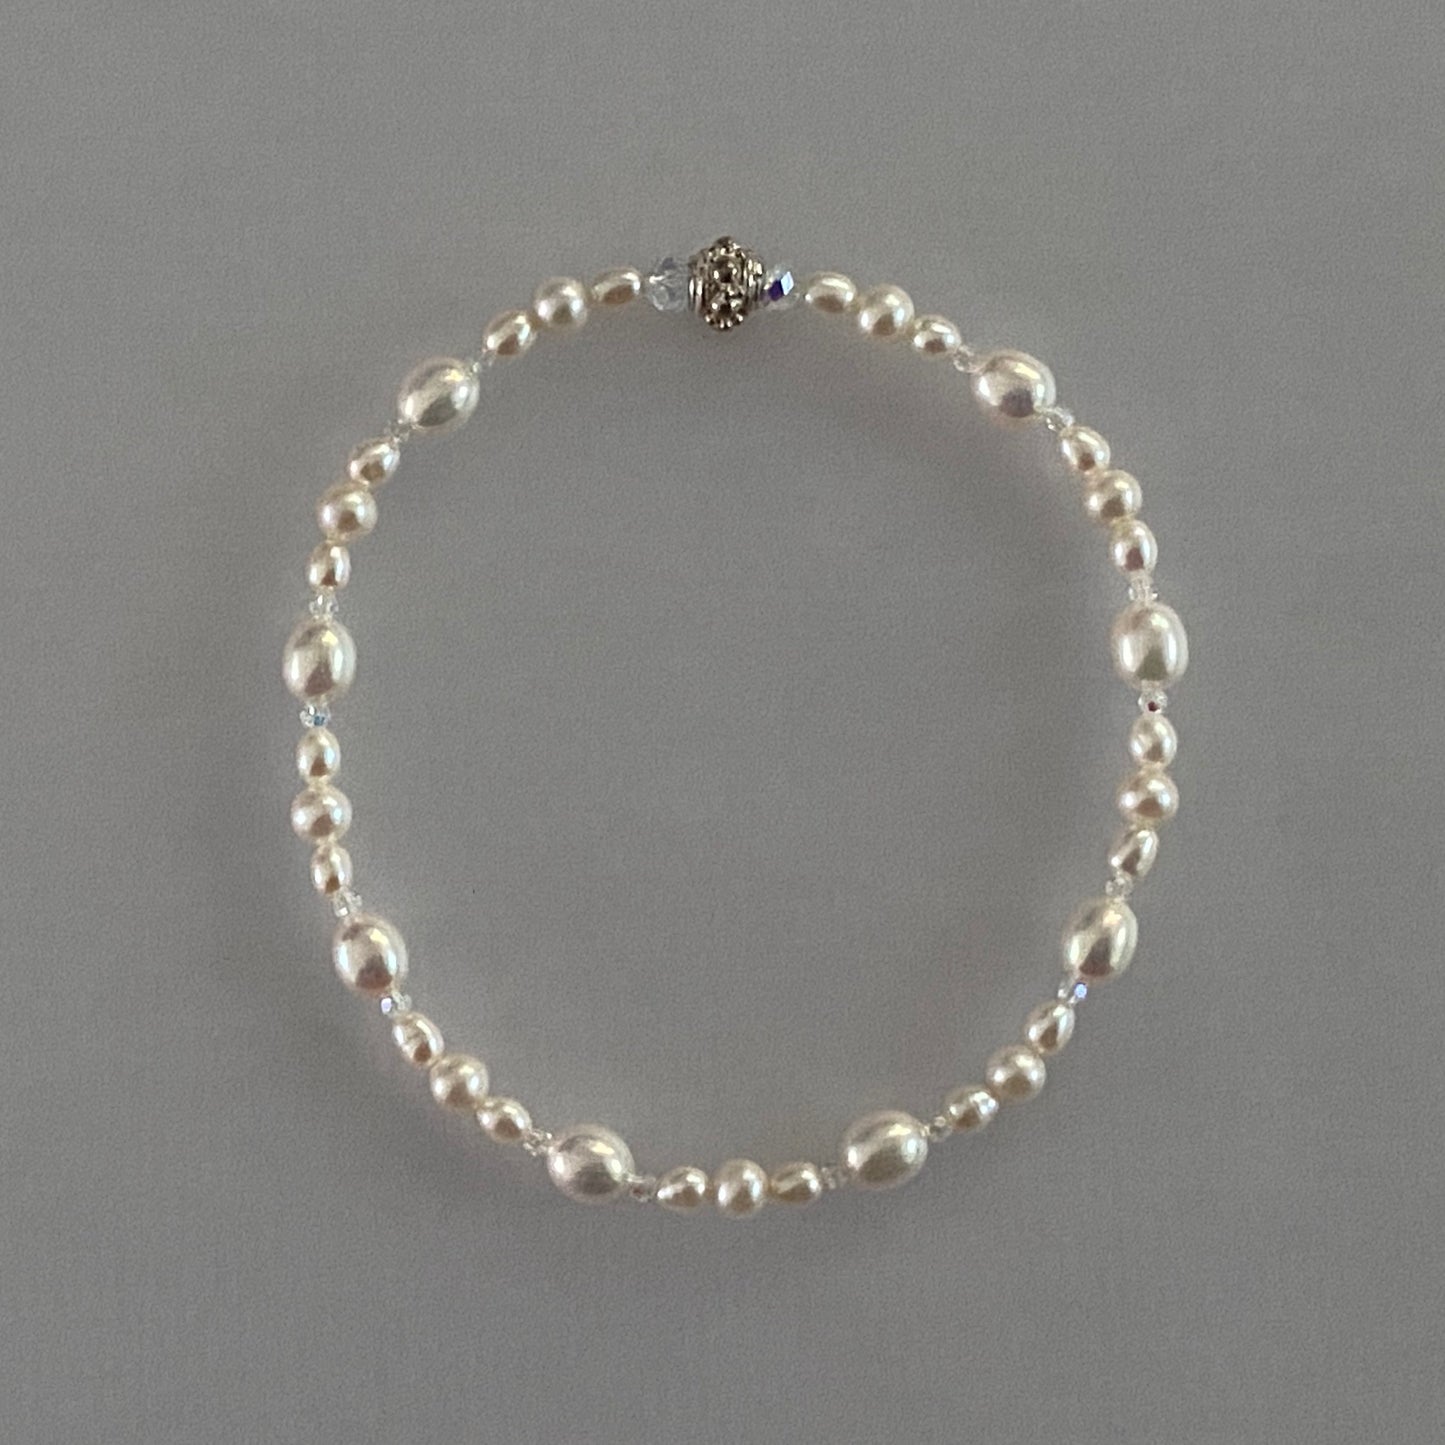 7-3/4" stretch bracelet with soft white freshwater cultured pearls and Swarovski crystal beads